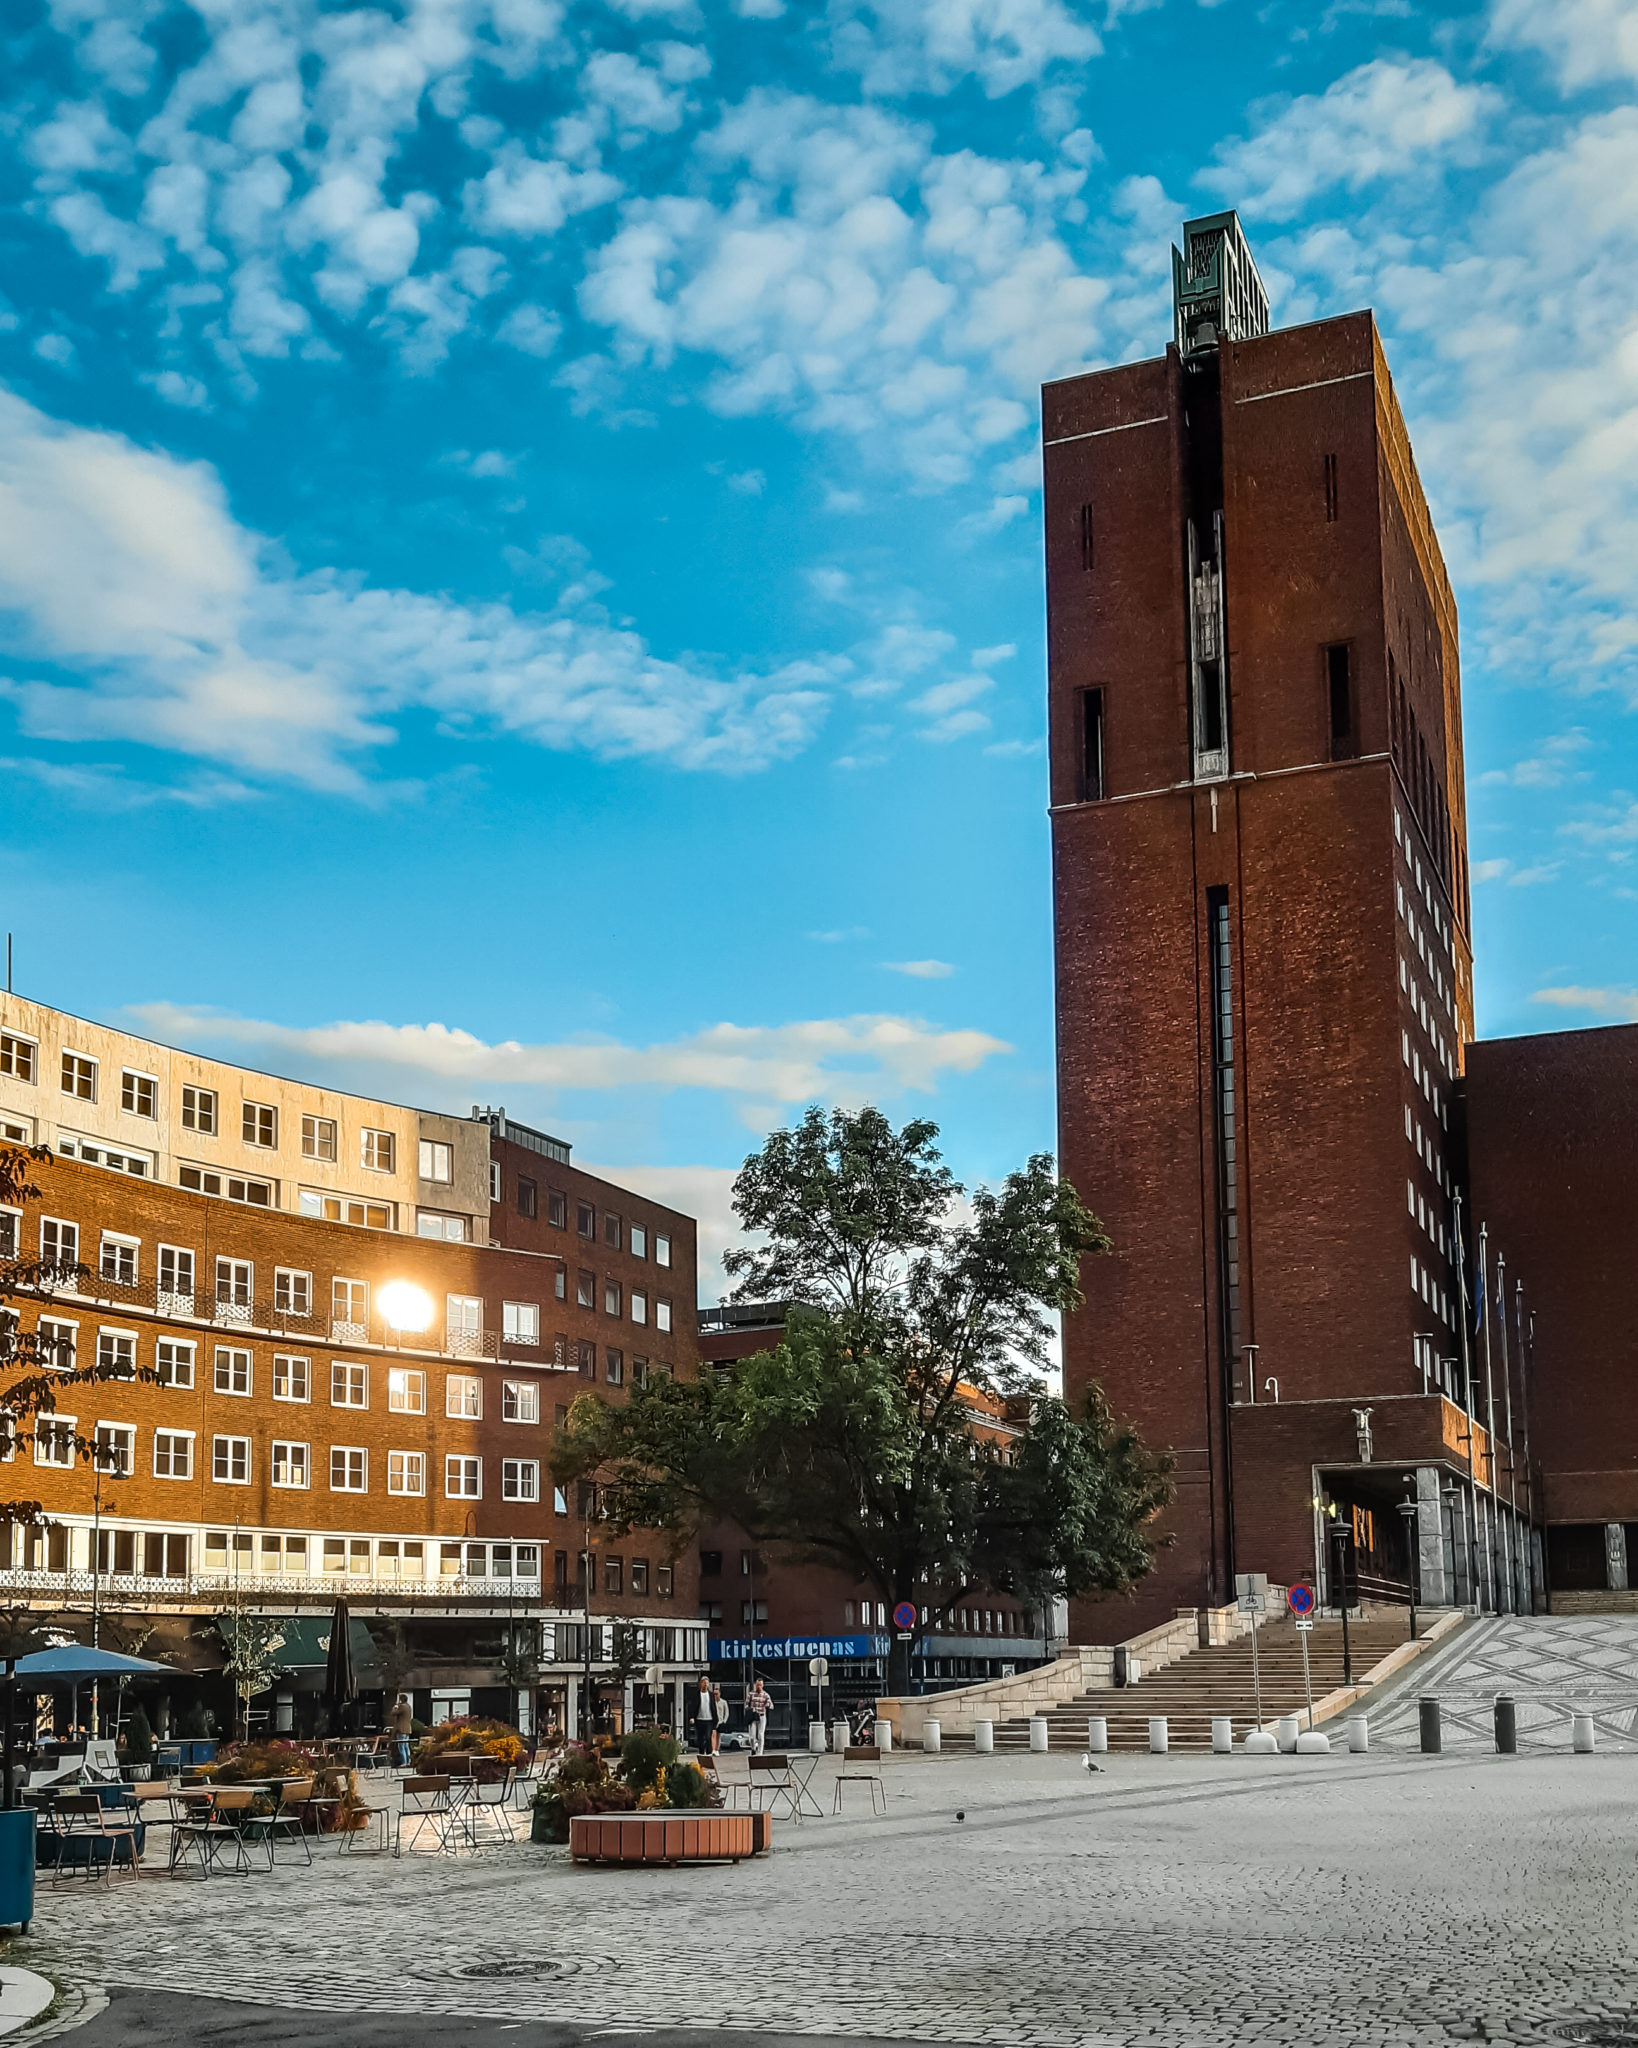 Two Days in Oslo - 20 Best Things to Do in Norway's Capital